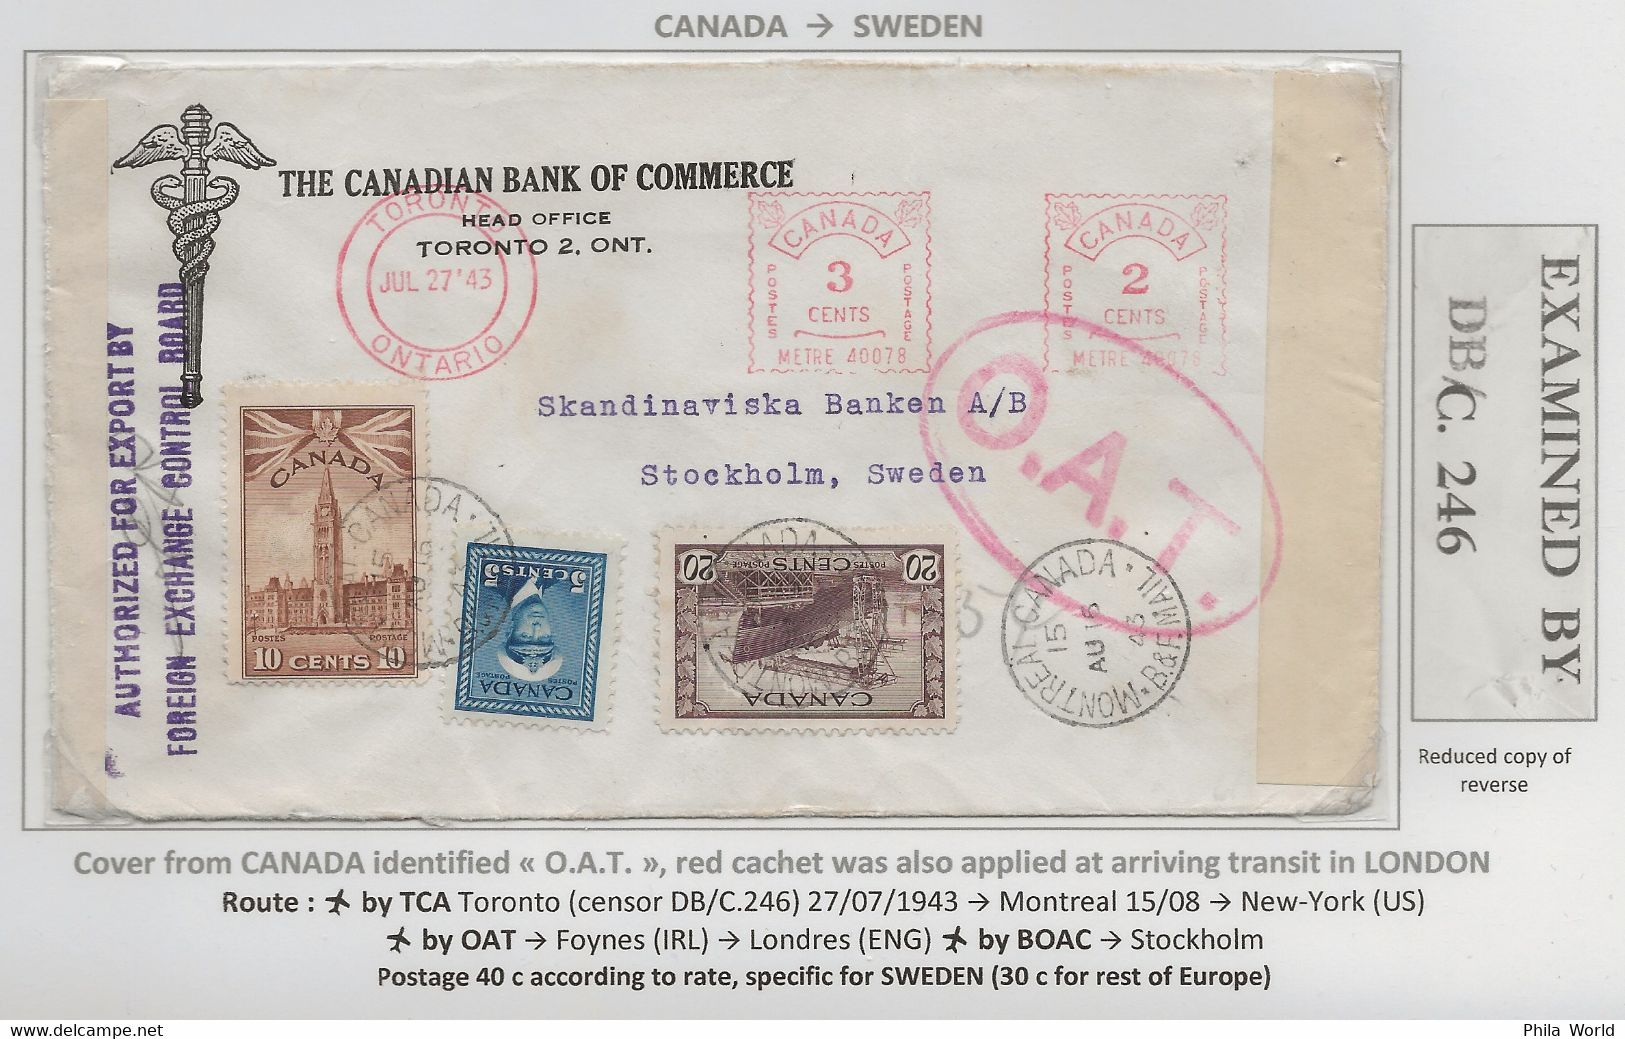 OAT 1943 CANADA Meter Postage EMA Air Mail Cover > SWEDEN US Censor EXAMINED DB/C 246 Censortape From TORONTO - Storia Postale